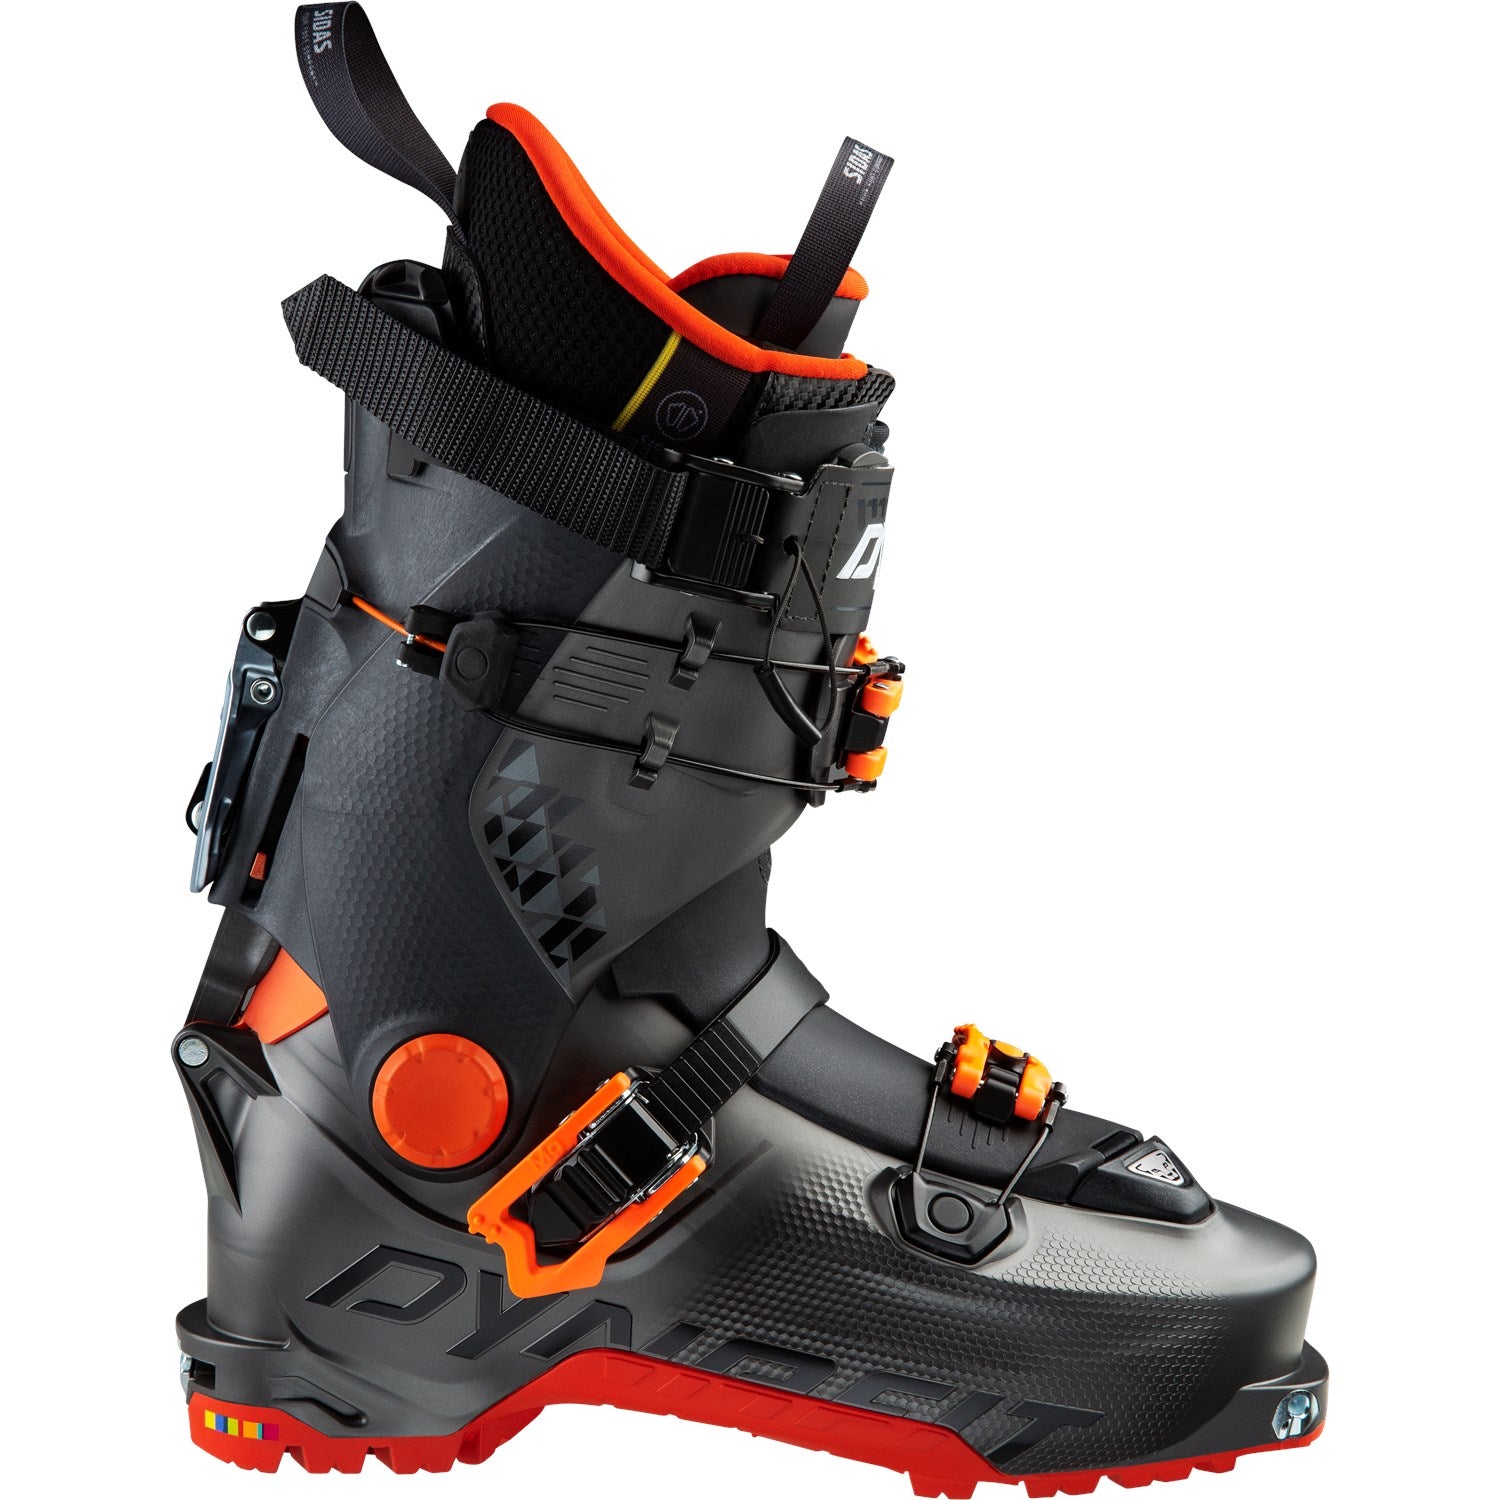 black and orange 3 buckle, 3 piece ski touring boots with hoji lever lock system